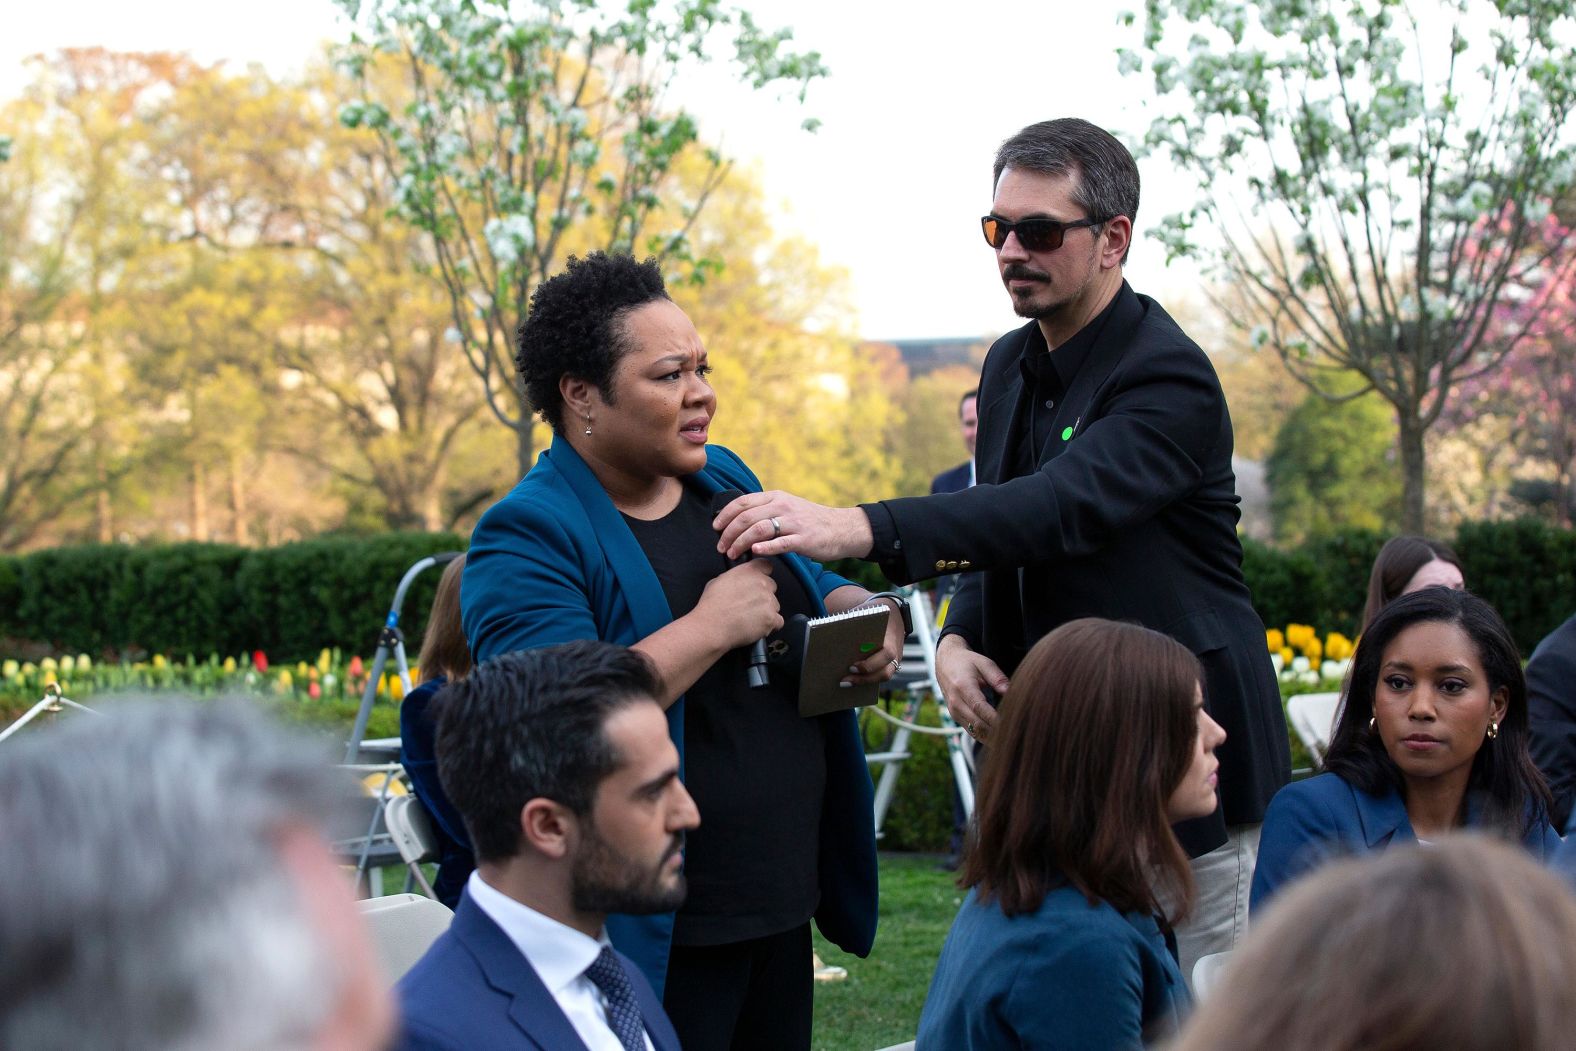 A White House aide attempts to take the microphone out of the hands of PBS reporter Yamiche Alcindor during a briefing at the White House on March 29. <a href="index.php?page=&url=https%3A%2F%2Ftwitter.com%2FYamiche%2Fstatus%2F1244409447230947328" target="_blank" target="_blank">Alcindor asked Trump</a> about an appearance he made on Fox News on March 26, where he questioned whether some governors actually needed the amount of aid they were requesting to combat the coronavirus: "I have a feeling that a lot of the numbers that are being said in some areas are just bigger than they are going to be," <a href="index.php?page=&url=https%3A%2F%2Fyoutu.be%2FA6Jd-e1vUoA" target="_blank" target="_blank">Trump told Sean Hannity on Fox News.</a> "I don't believe you need 40,000 or 30,000 ventilators." In response to Alcindor's question about how the views Trump expressed in his Fox News interview will impact how he fulfills orders for ventilators or for masks, Trump said: "Why don't you act in a little more positive — it's always trying to get ya. Get ya. Get ya. And you know what? That's why nobody trusts the media anymore. ... Be nice. Don't be threatening. Don't be threatening. Be nice."